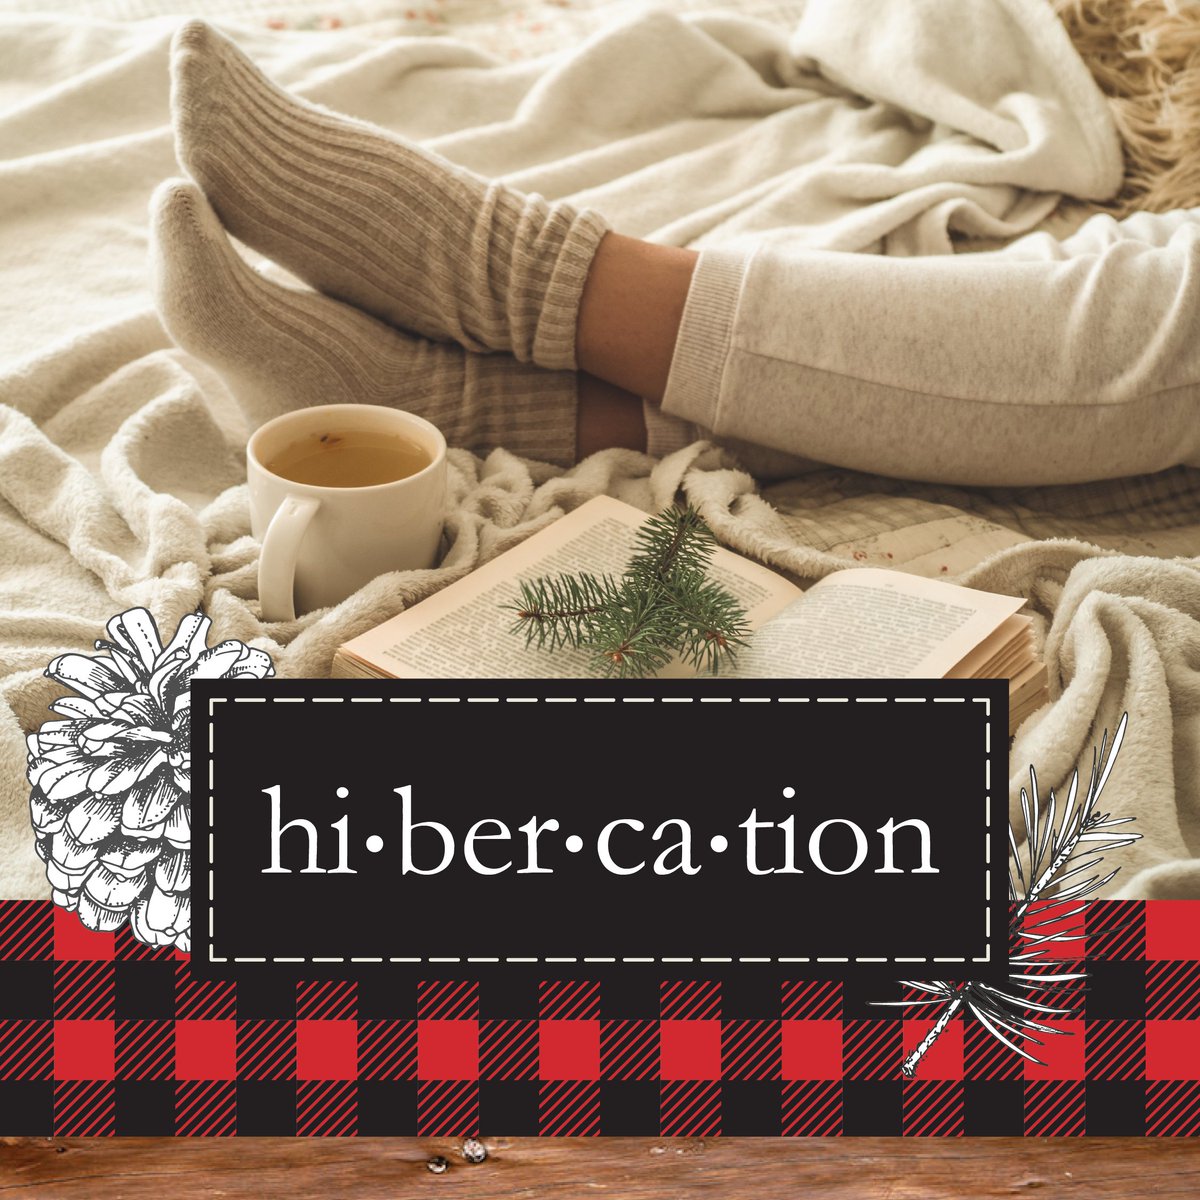 Have you heard?! Hibercation is back! We define it as part vacation, part hibernation and 100% good for the soul. 
For more information check out our latest blog.
tourcayuga.com/blog/post/the-…
#tourcayuga  #hibercation #cozy  #getaway